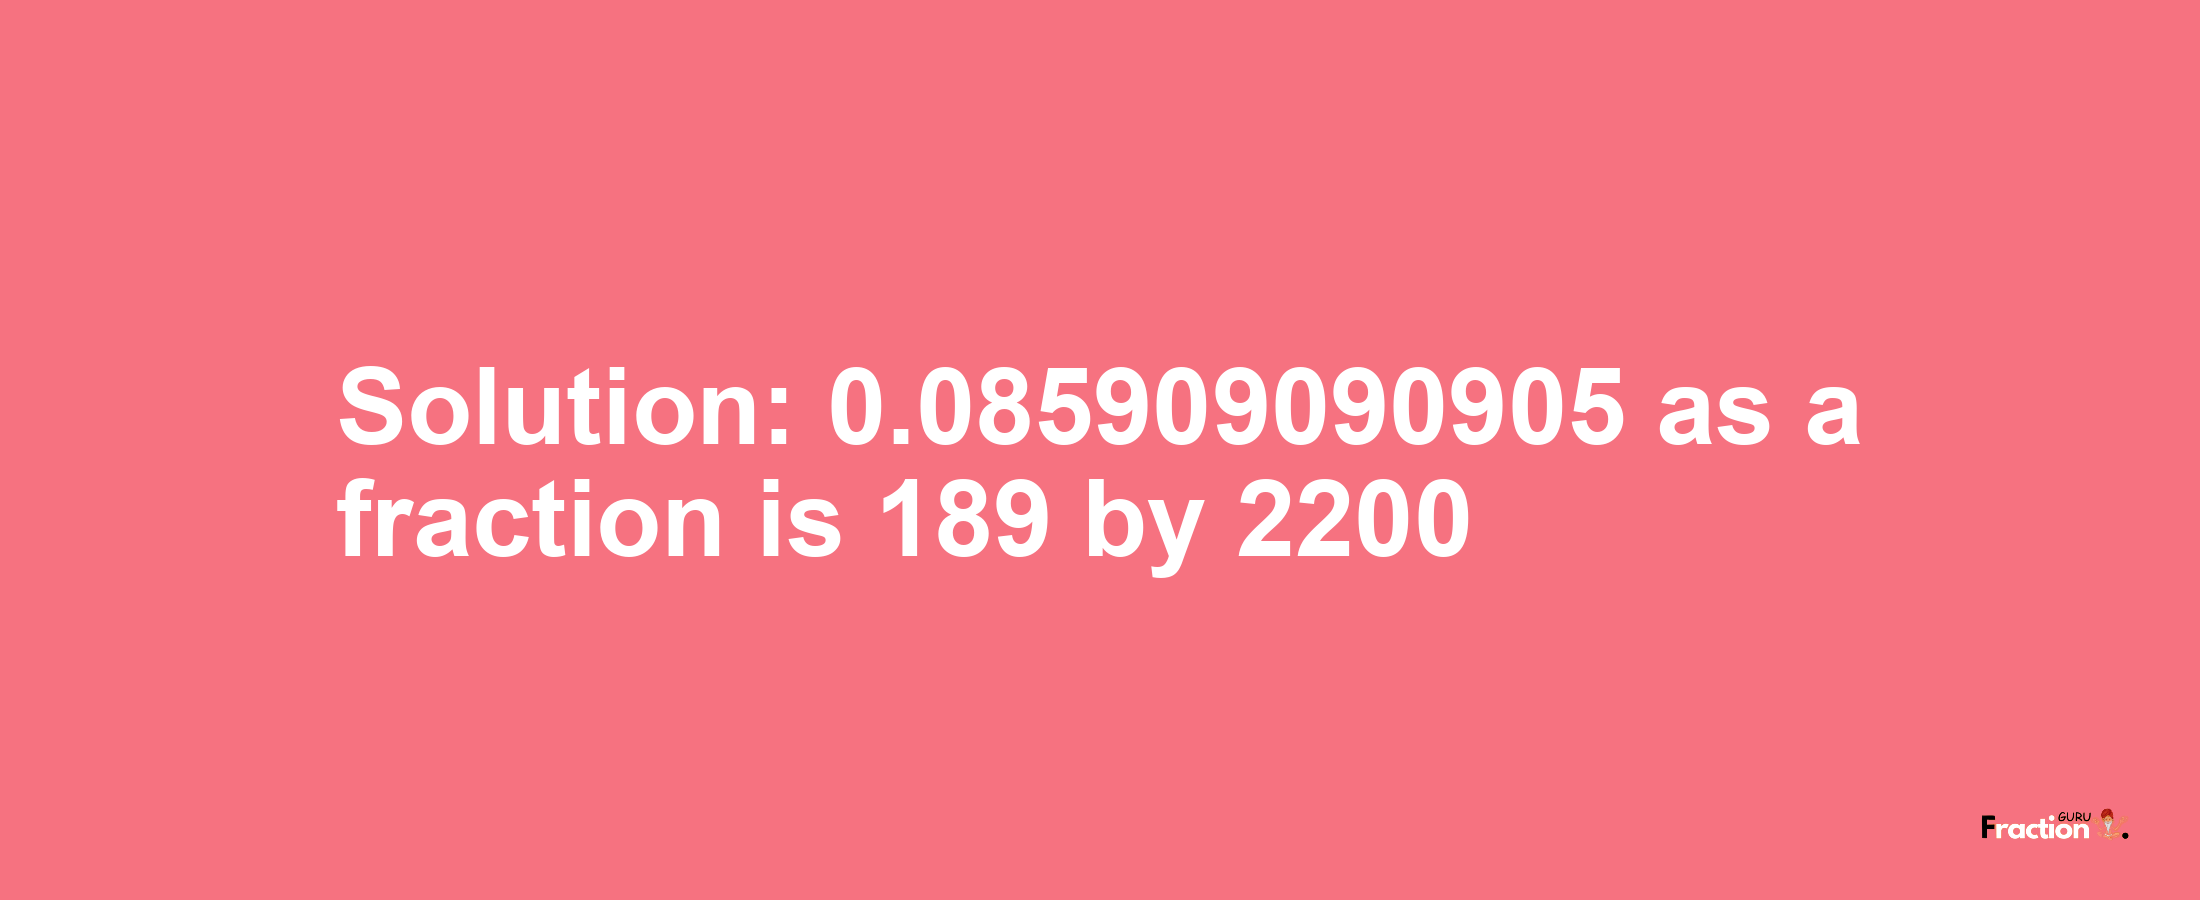 Solution:0.085909090905 as a fraction is 189/2200